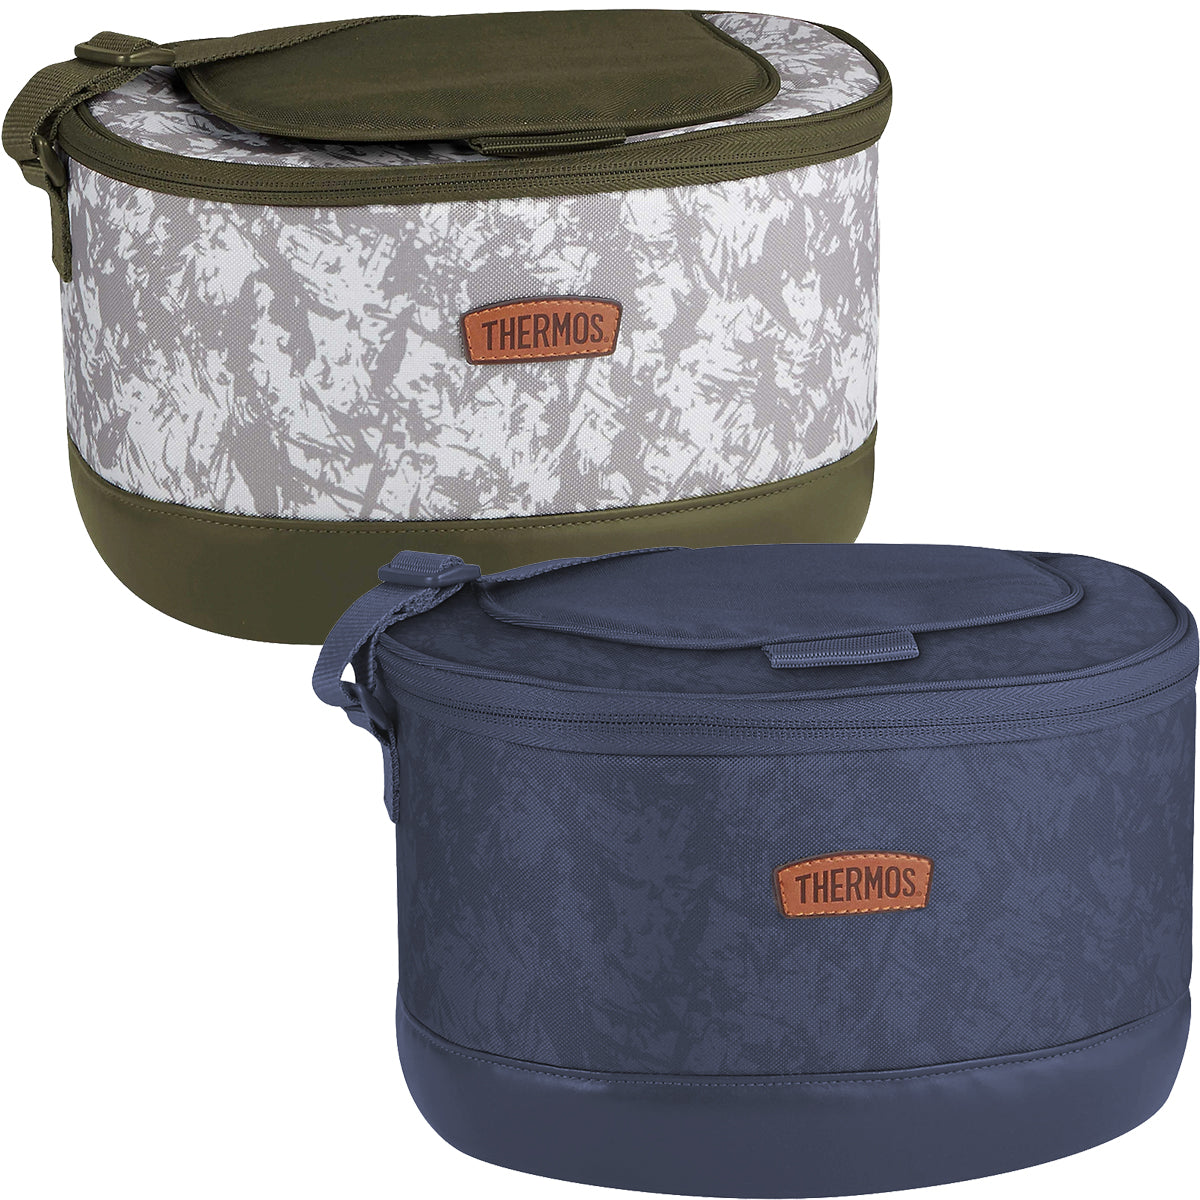 Thermos Premium 6-Can Soft Cooler Thermos